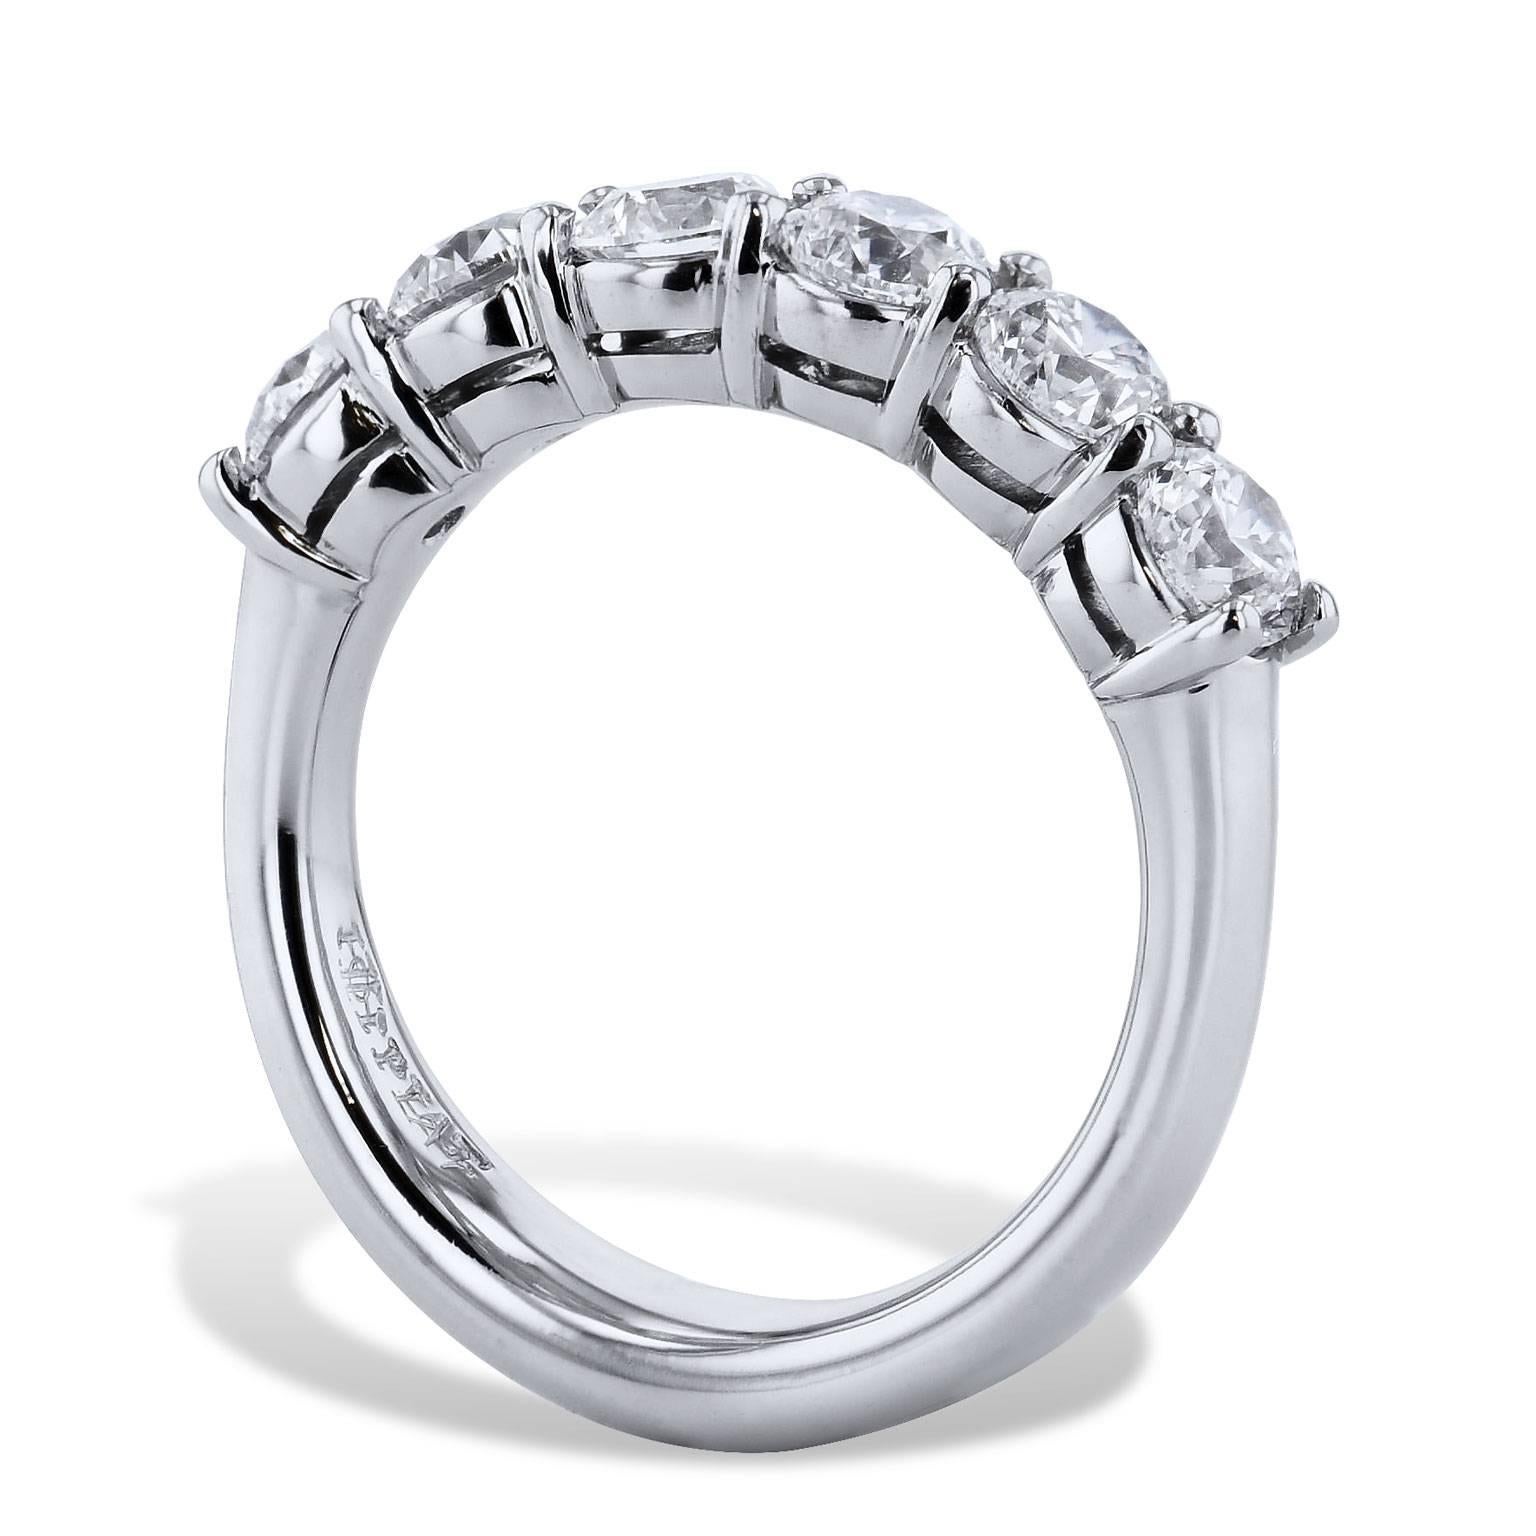 This handmade H & H band ring features 1.80 carat of round brilliant cut diamond in shared-prong (E/F/VS1/VS2). Fashioned in platinum, this band ring provides a mosaic of light and color that twinkles with remarkable beauty.

size 6 